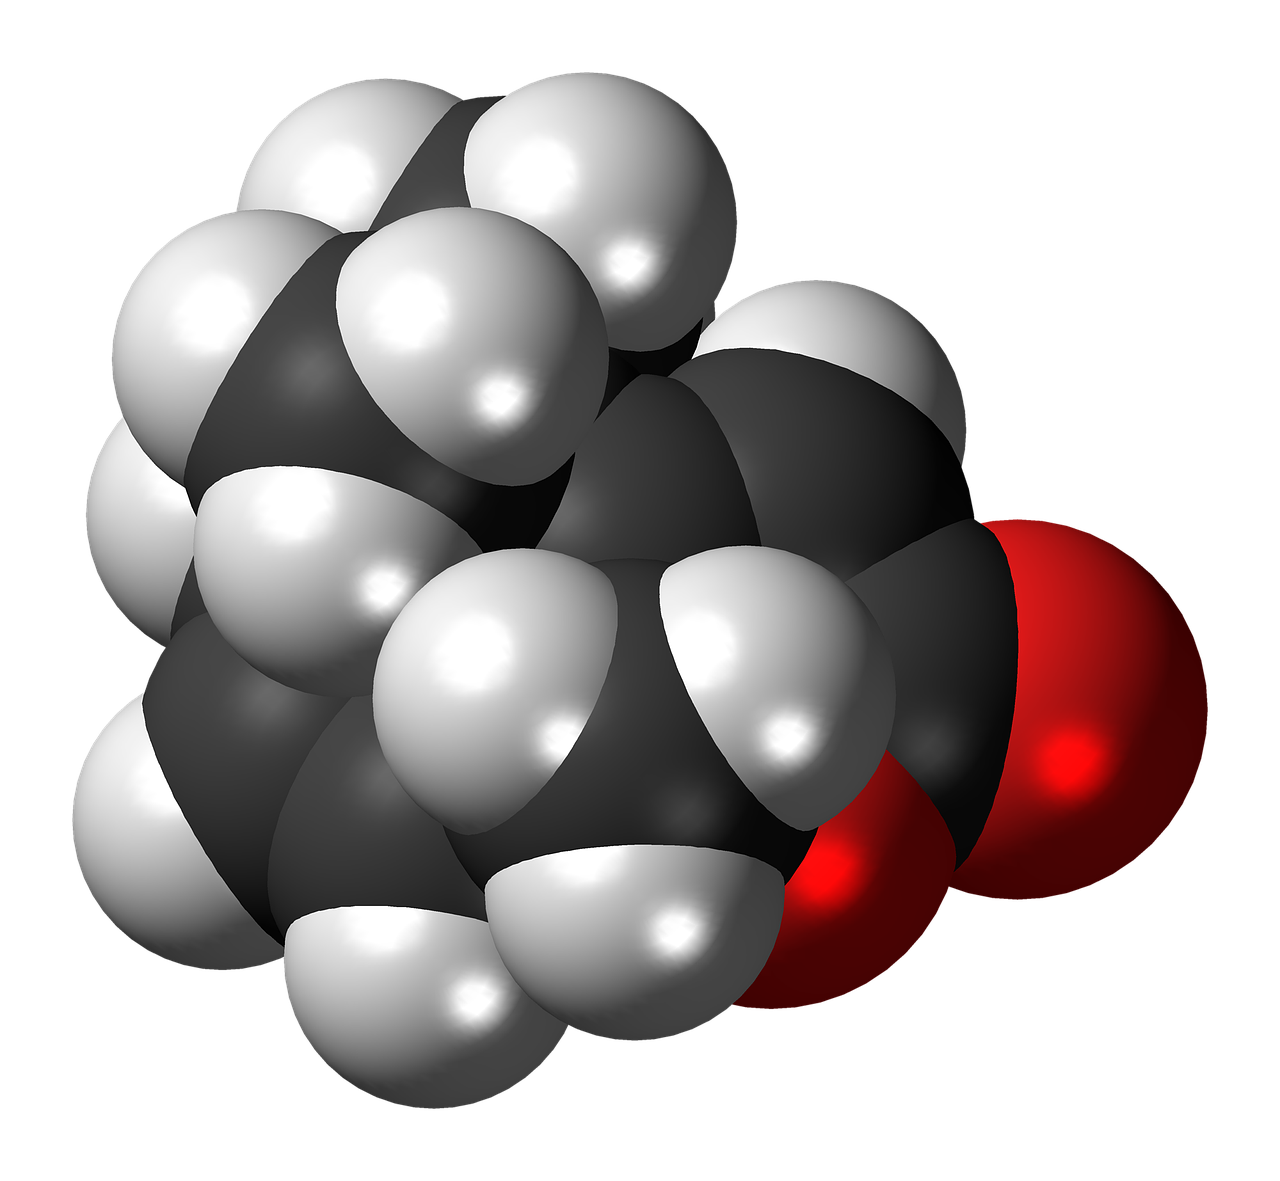 a black and white ball and some red balls, a raytraced image, by Jon Coffelt, detailed chemical diagram, it has a red and black paint, thc, shell